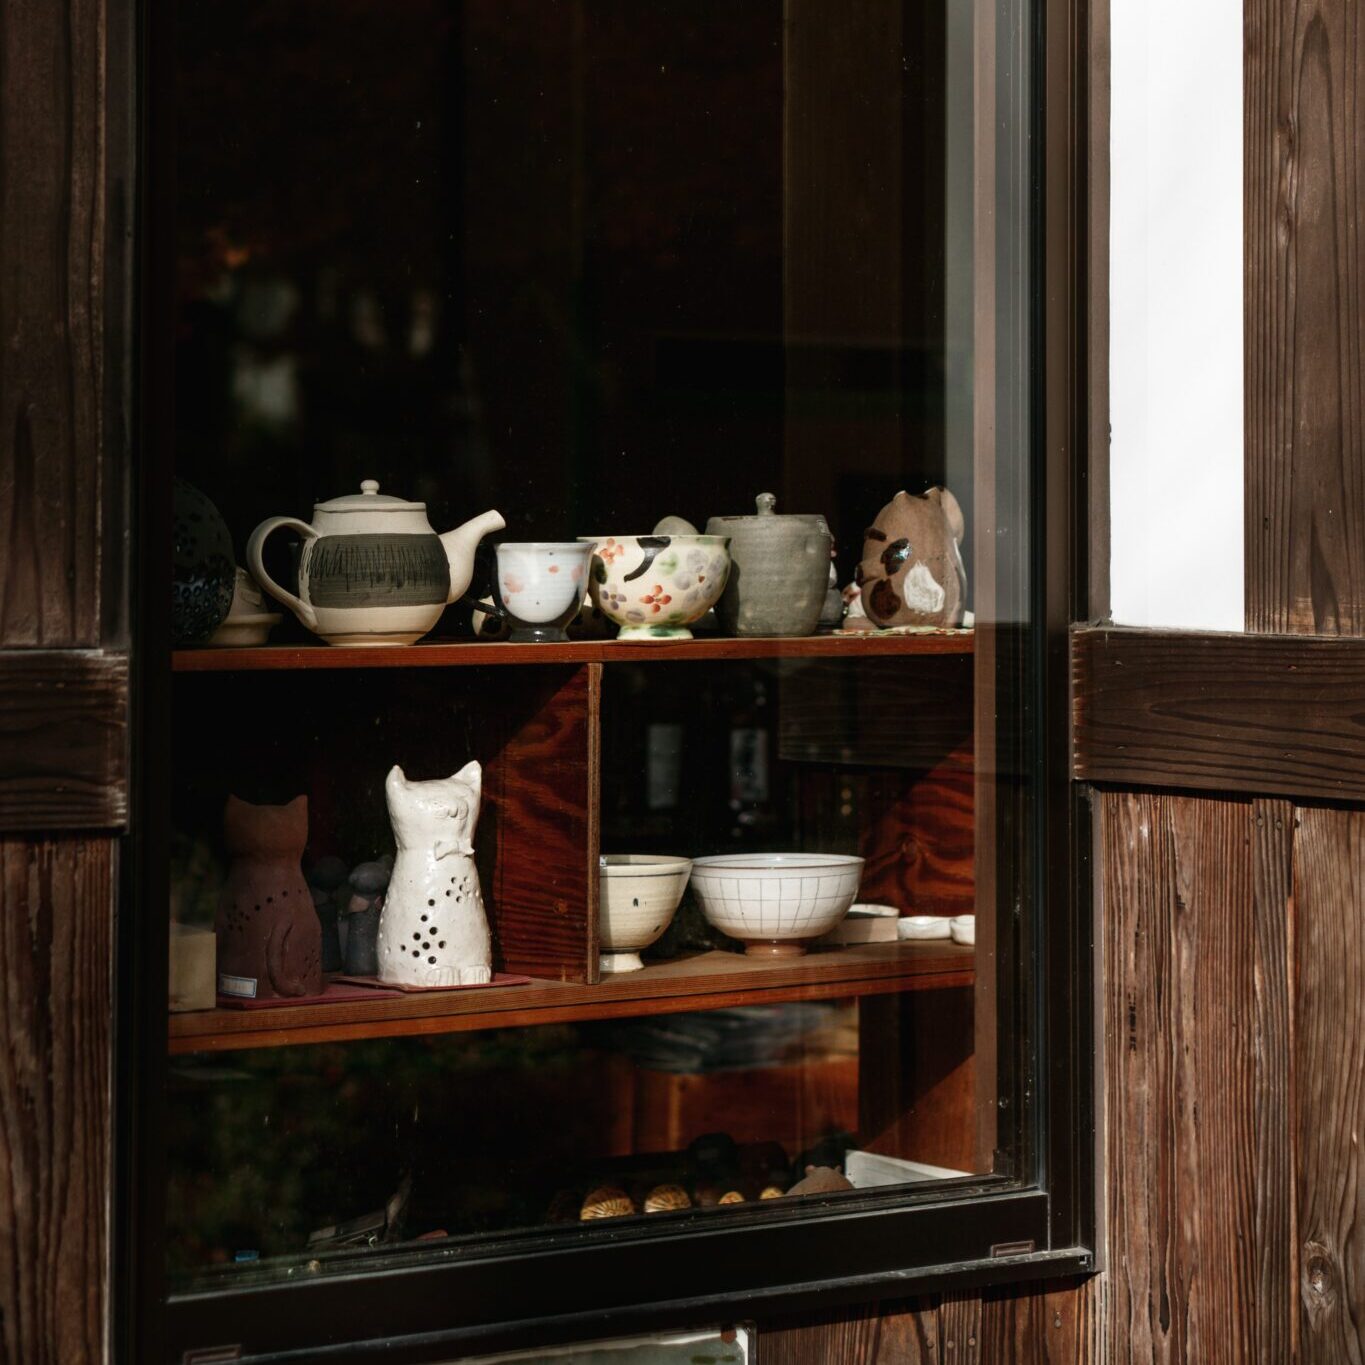 Japanese pottery in a cupboard